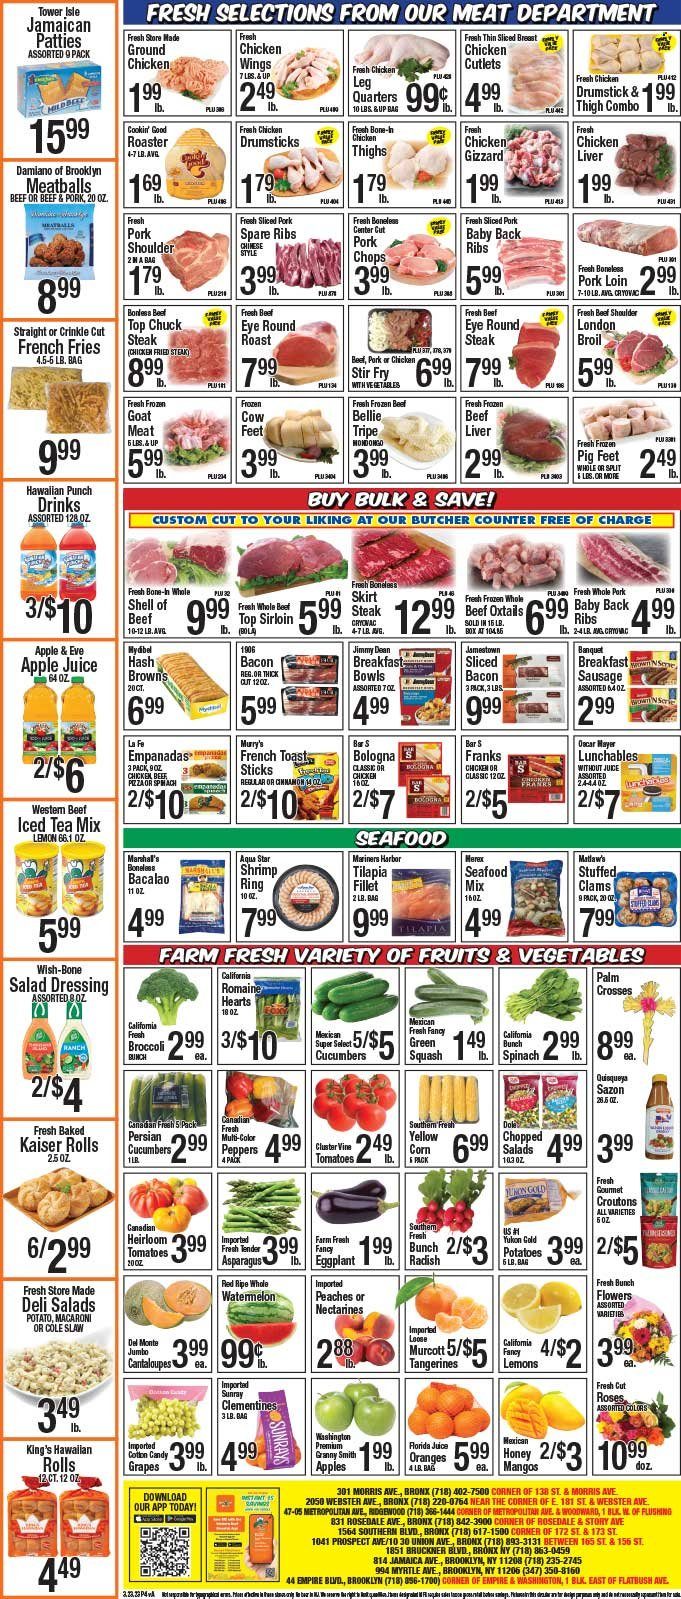 thumbnail - Western Beef Flyer - 03/23/2023 - 03/29/2023 - Sales products - hawaiian rolls, asparagus, broccoli, cantaloupe, corn, cucumber, zucchini, potatoes, peppers, eggplant, chopped salad, grapes, watermelon, oranges, Granny Smith, ground chicken, chicken breasts, chicken cutlets, chicken legs, chicken thighs, chicken wings, chicken drumsticks, chicken livers, chicken, beef liver, beef meat, oxtail, steak, eye of round, round roast, round steak, chuck steak, ribs, roast, pork chops, pork loin, pork meat, pork ribs, pork shoulder, pork spare ribs, pork back ribs, goat meat, clams, tilapia, seafood, shrimps, pizza, meatballs, macaroni, breakfast bowl, Lunchables, Jimmy Dean, empanadas, bacon, ham, bologna sausage, Oscar Mayer, sausage, potato fries, french fries, cotton candy, croutons, Del Monte, cinnamon, salad dressing, dressing, honey, apple juice, juice, ice tea, beer, clementines, nectarines, tangerines, lemons, peaches. Page 4.